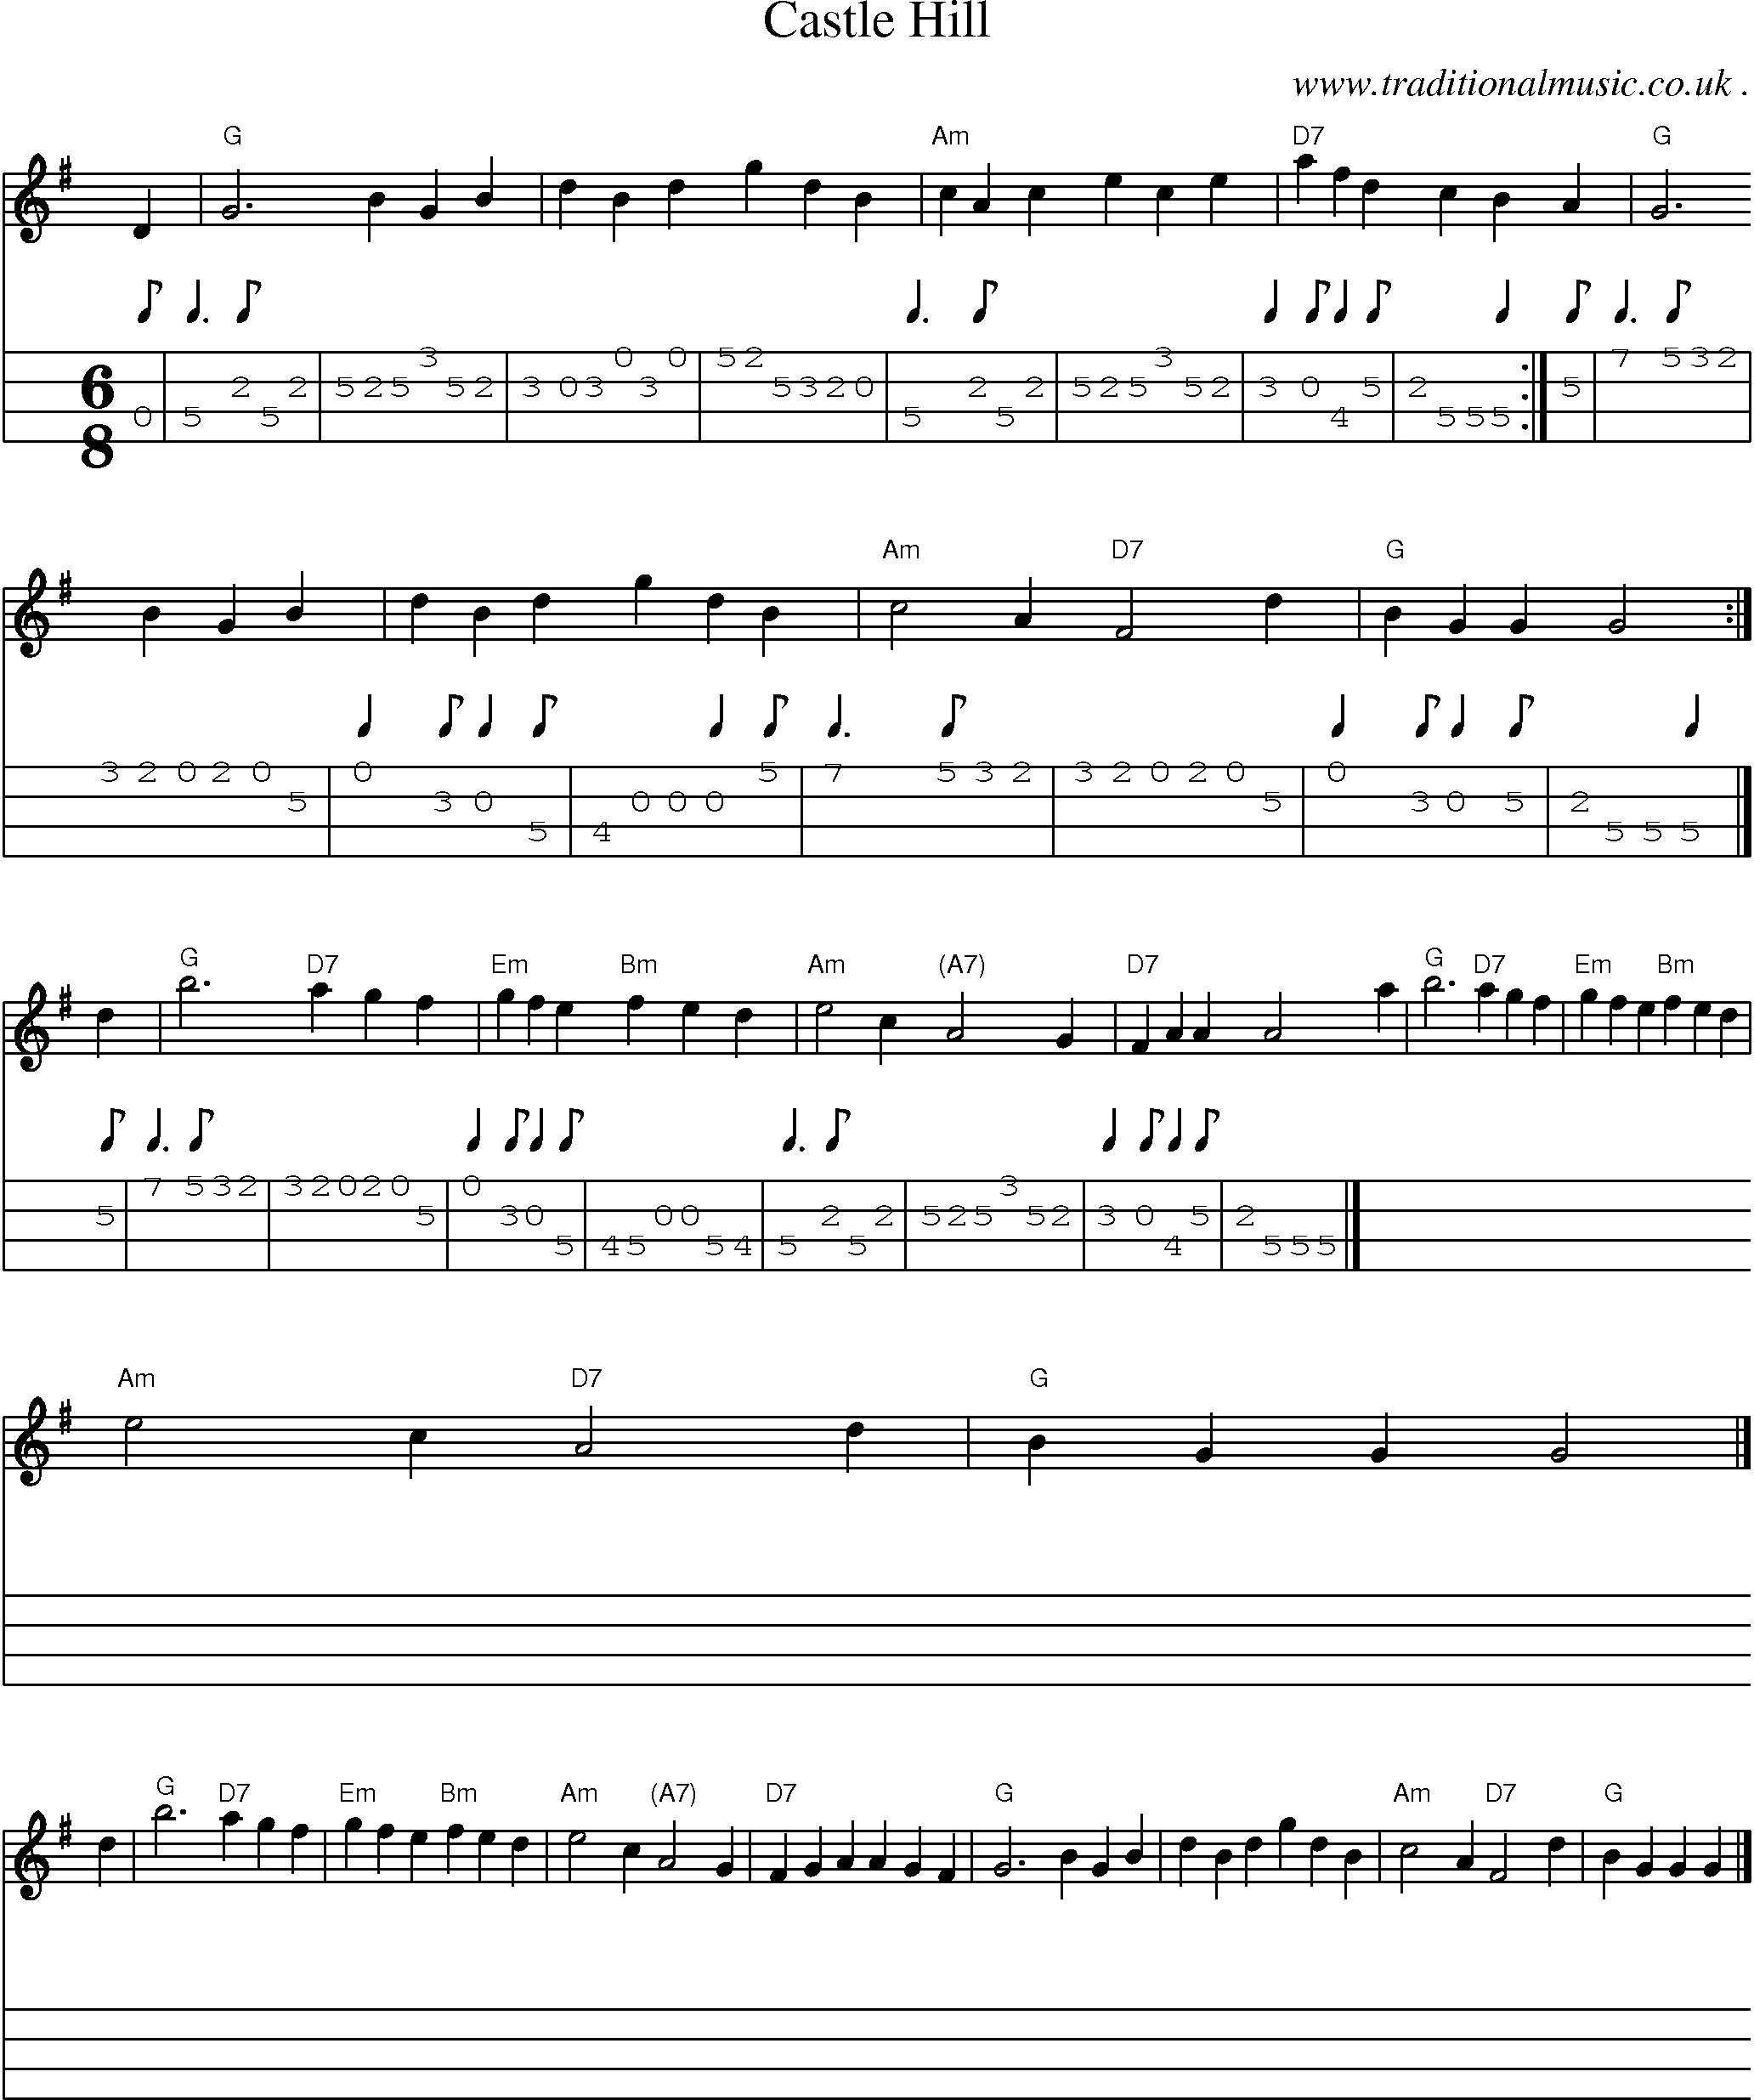 Sheet-music  score, Chords and Mandolin Tabs for Castle Hill